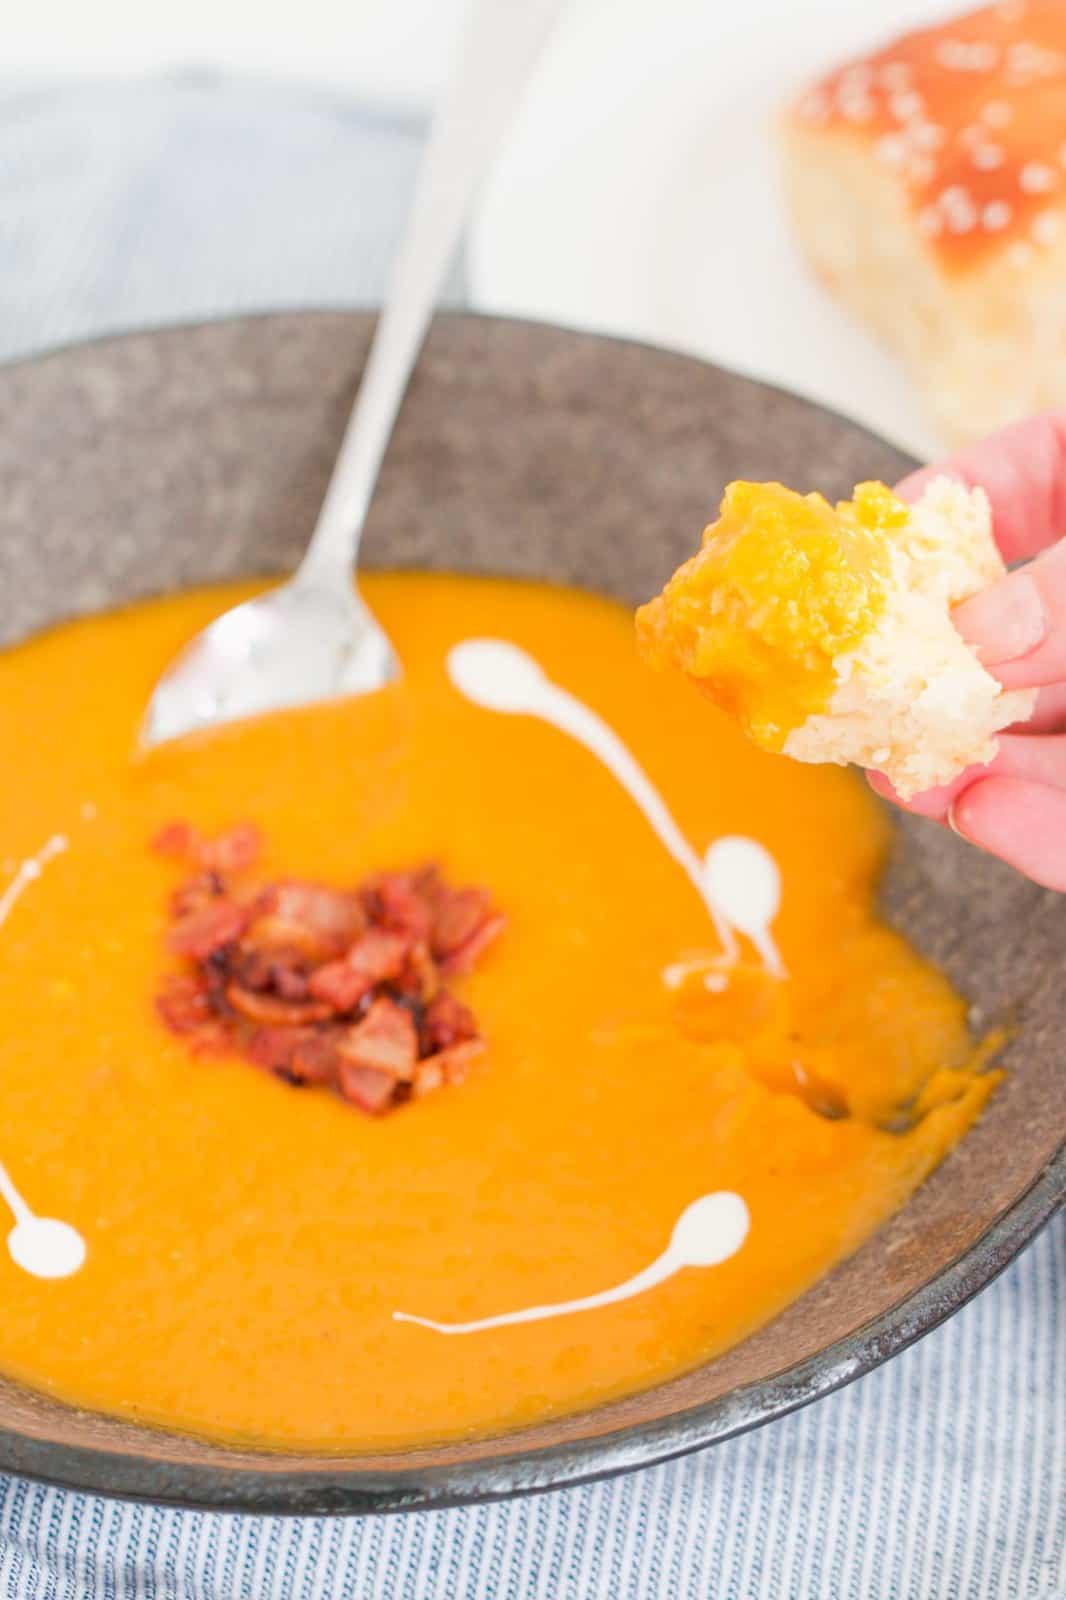 A hand holding a piece of bread being dipped into a bowl of soup.